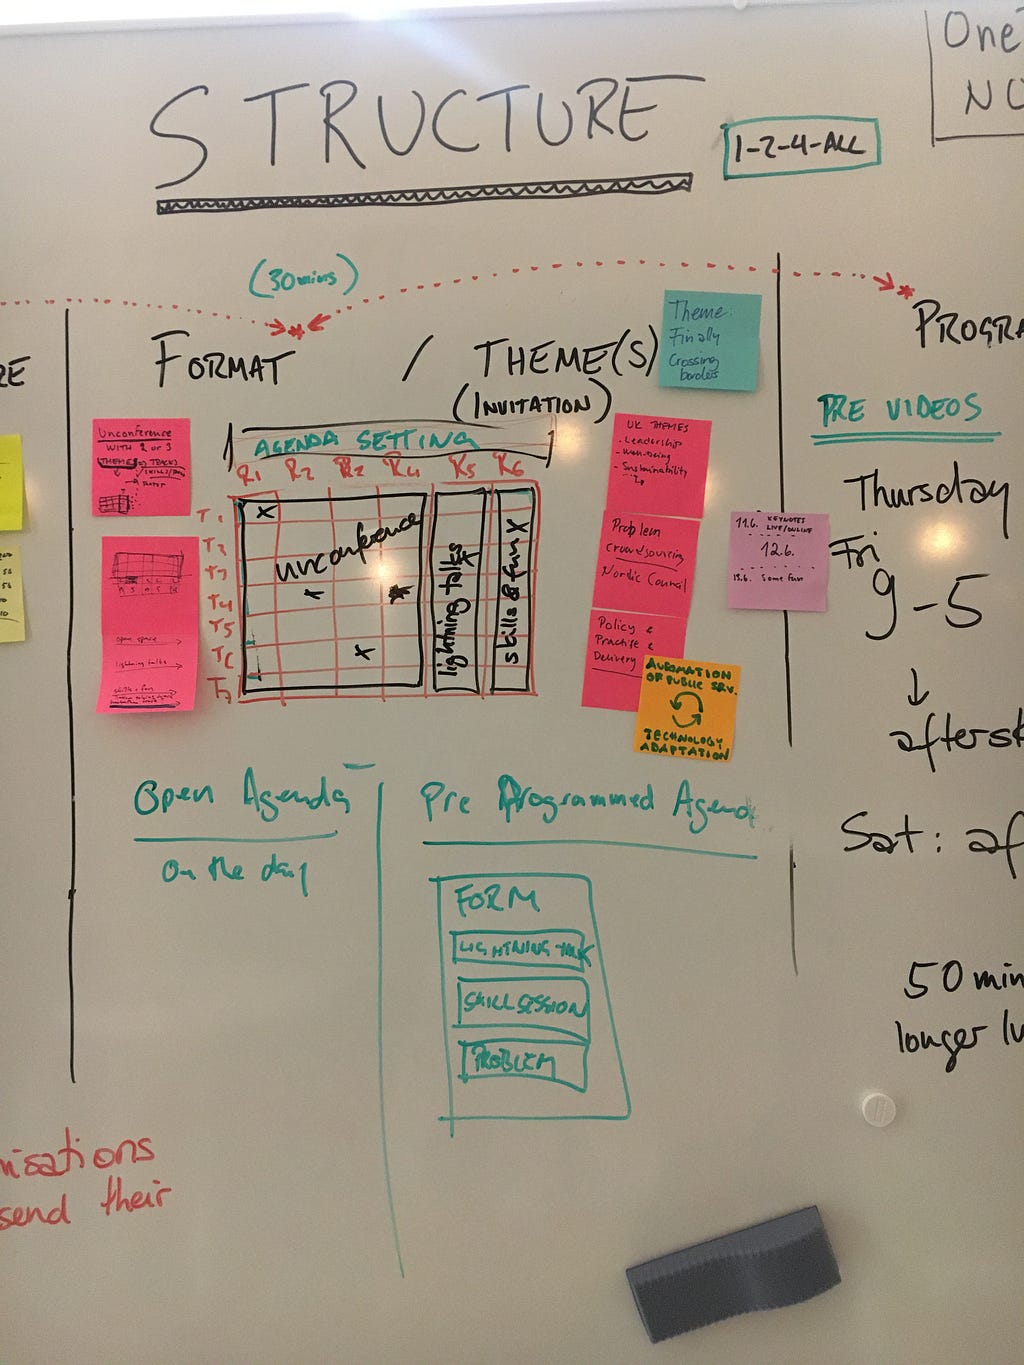 A whiteboard where we’re working on stucture and format, outlining the program. Work in progress.